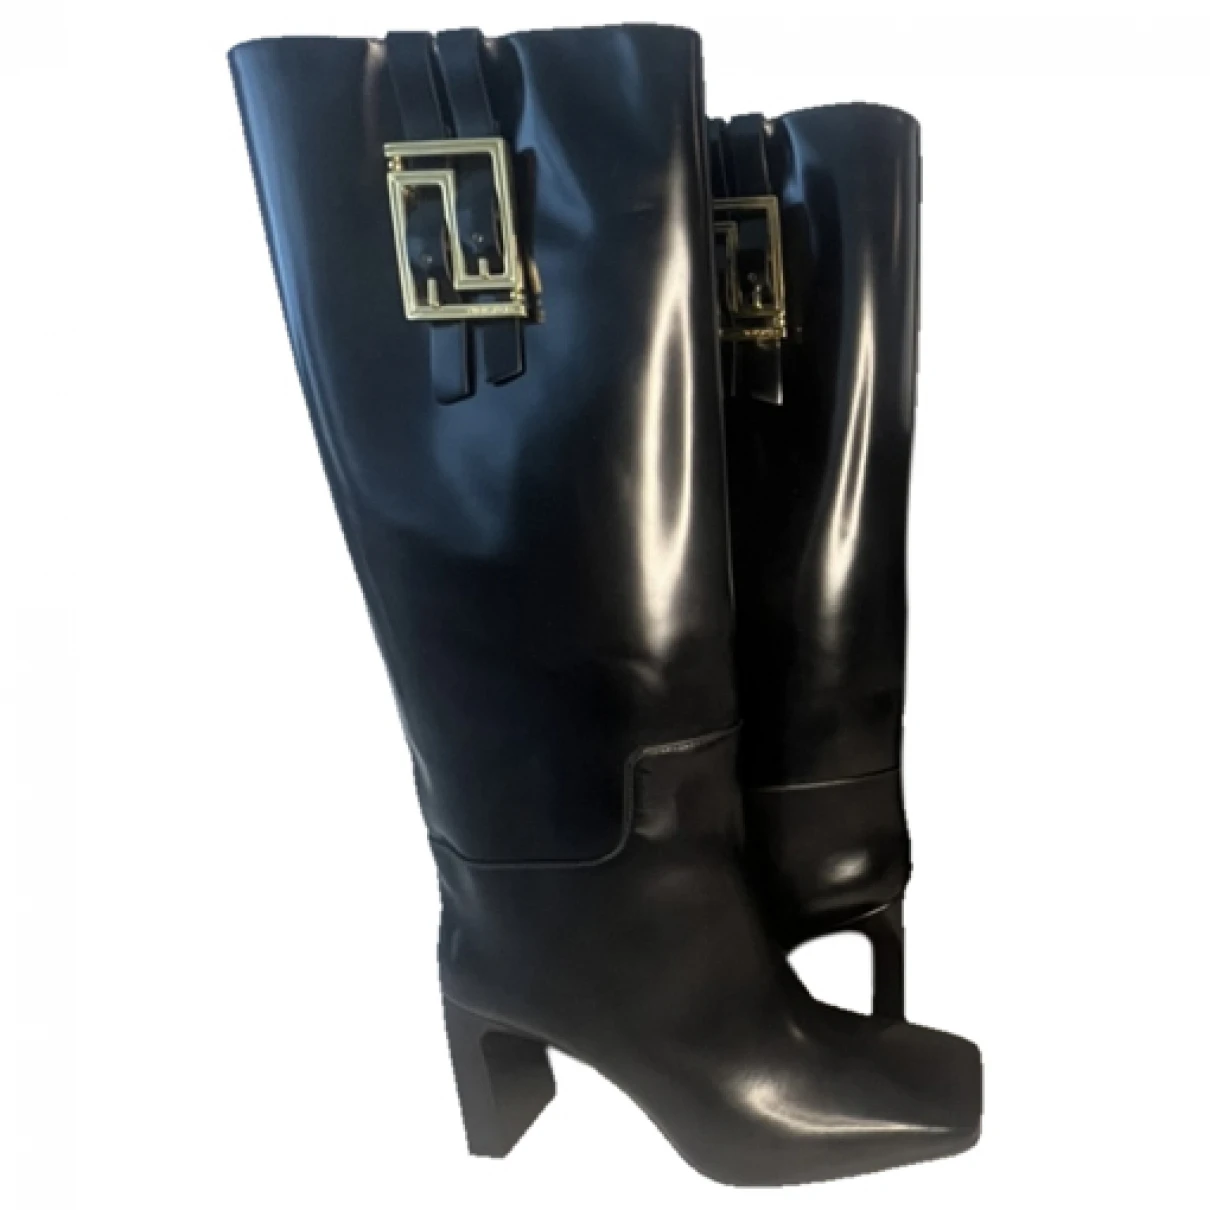 shoes Versace boots for Female Leather 40 EU. Used condition